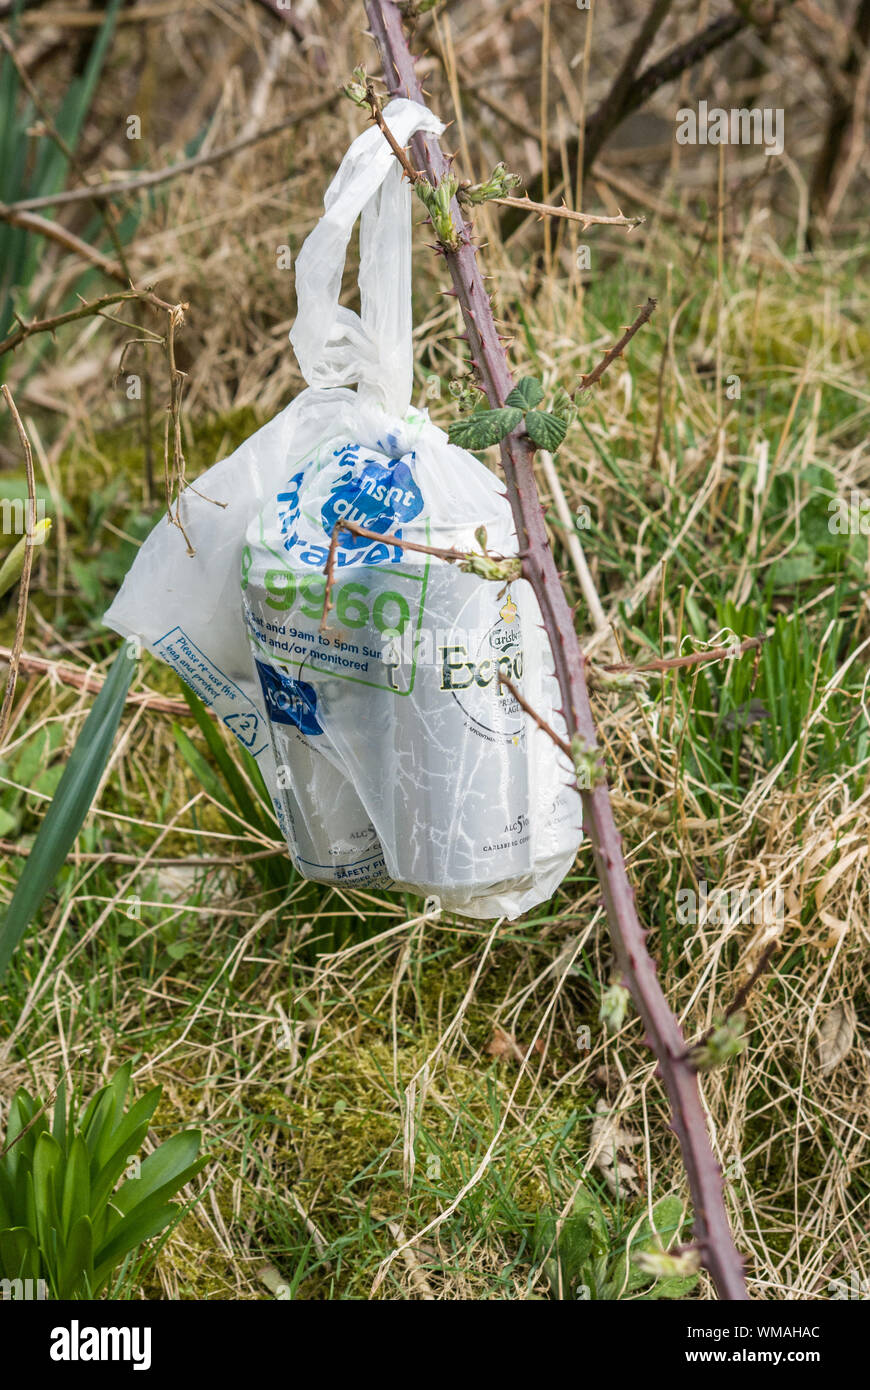 Empty cans of lager (beer) in a white plastic bag tied onto a bramble at the side of a road Stock Photo